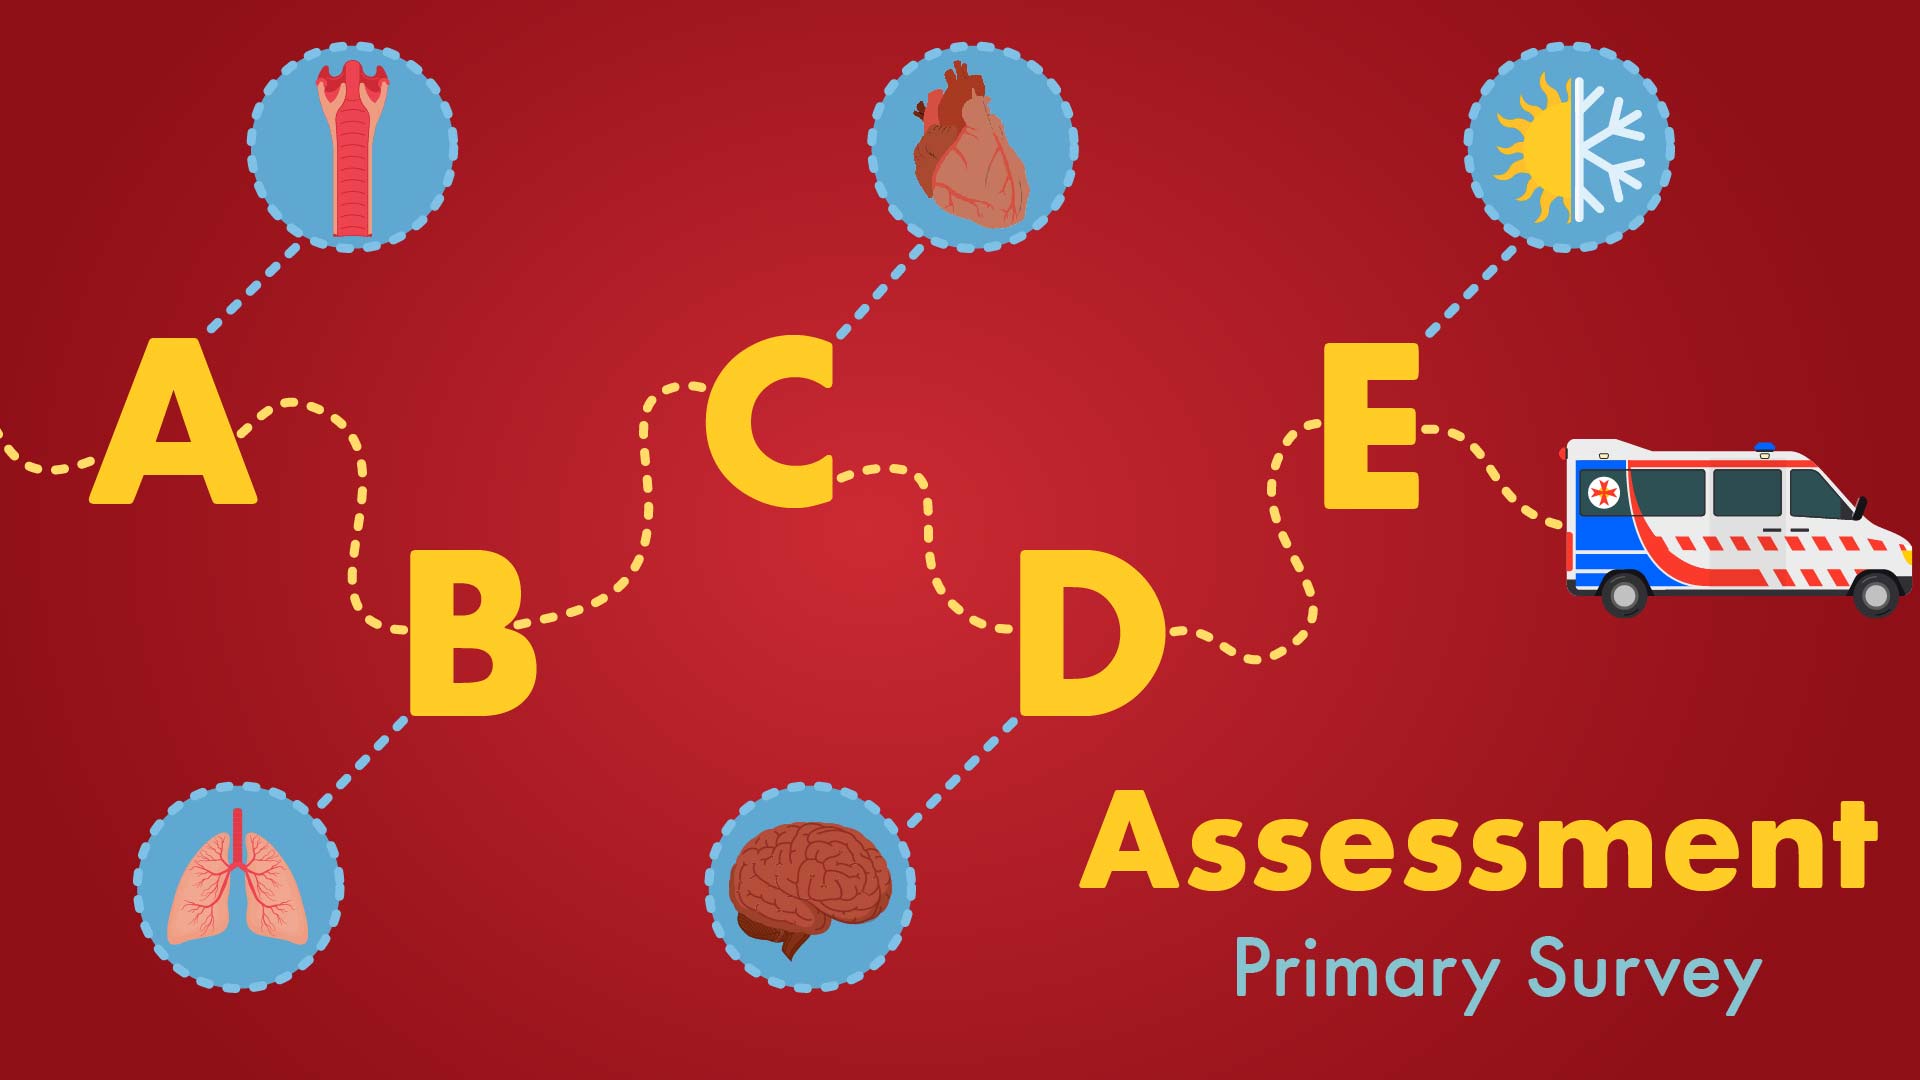 Image for ABCDE Assessment (Primary Survey)